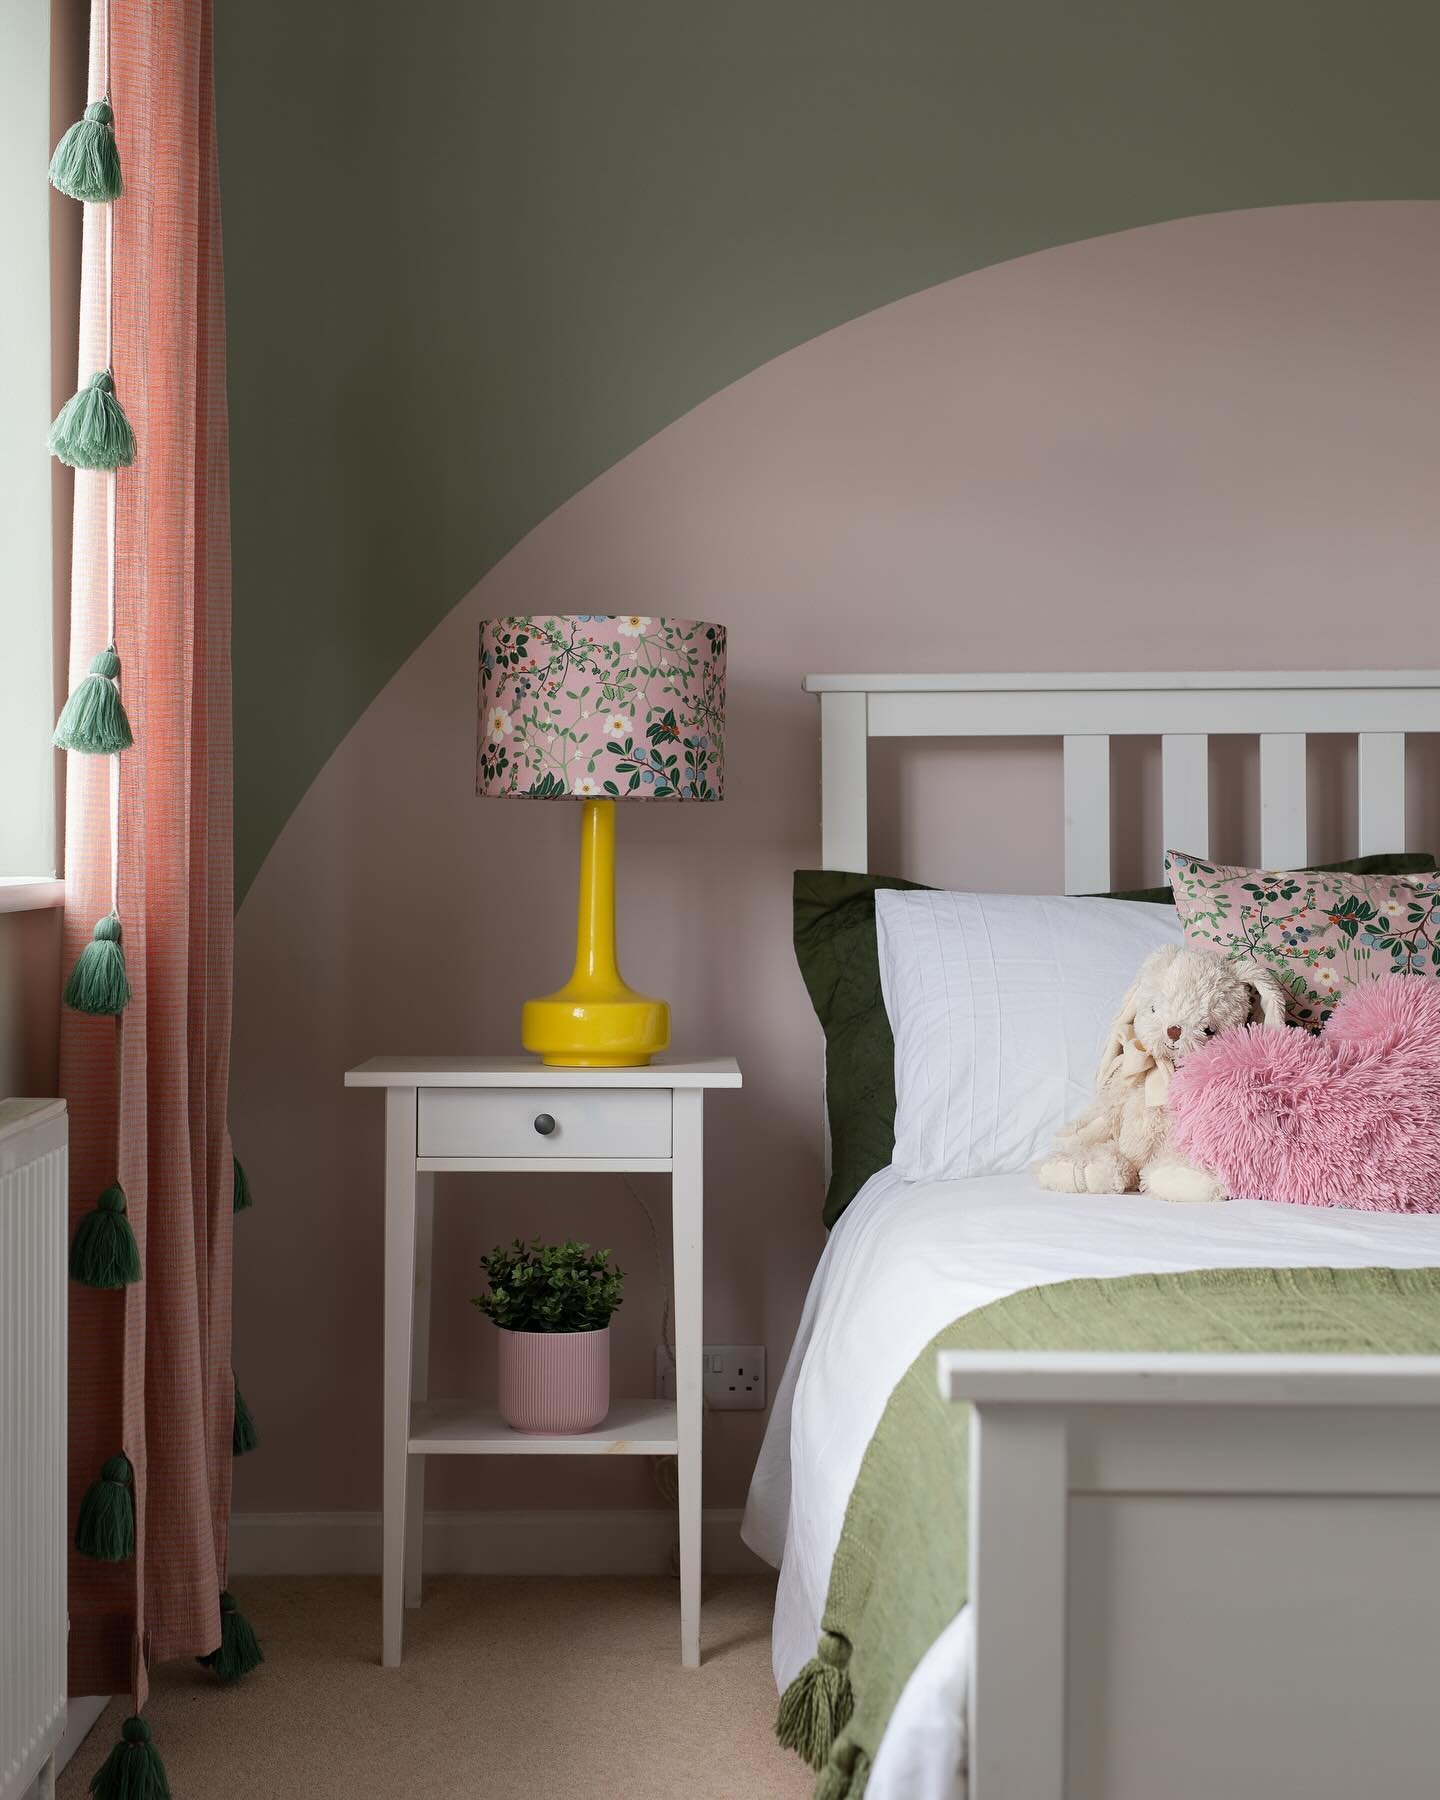 PRETTY GIRLS BEDROOM &bull; a pink rainbow in a soft green bedroom is the perfect palette for this creative young lady. 

Inspired by a beach sunset- we have taken some tropical elements and run with a floral theme - Rattan, Sheepskin, Fairy lights, 